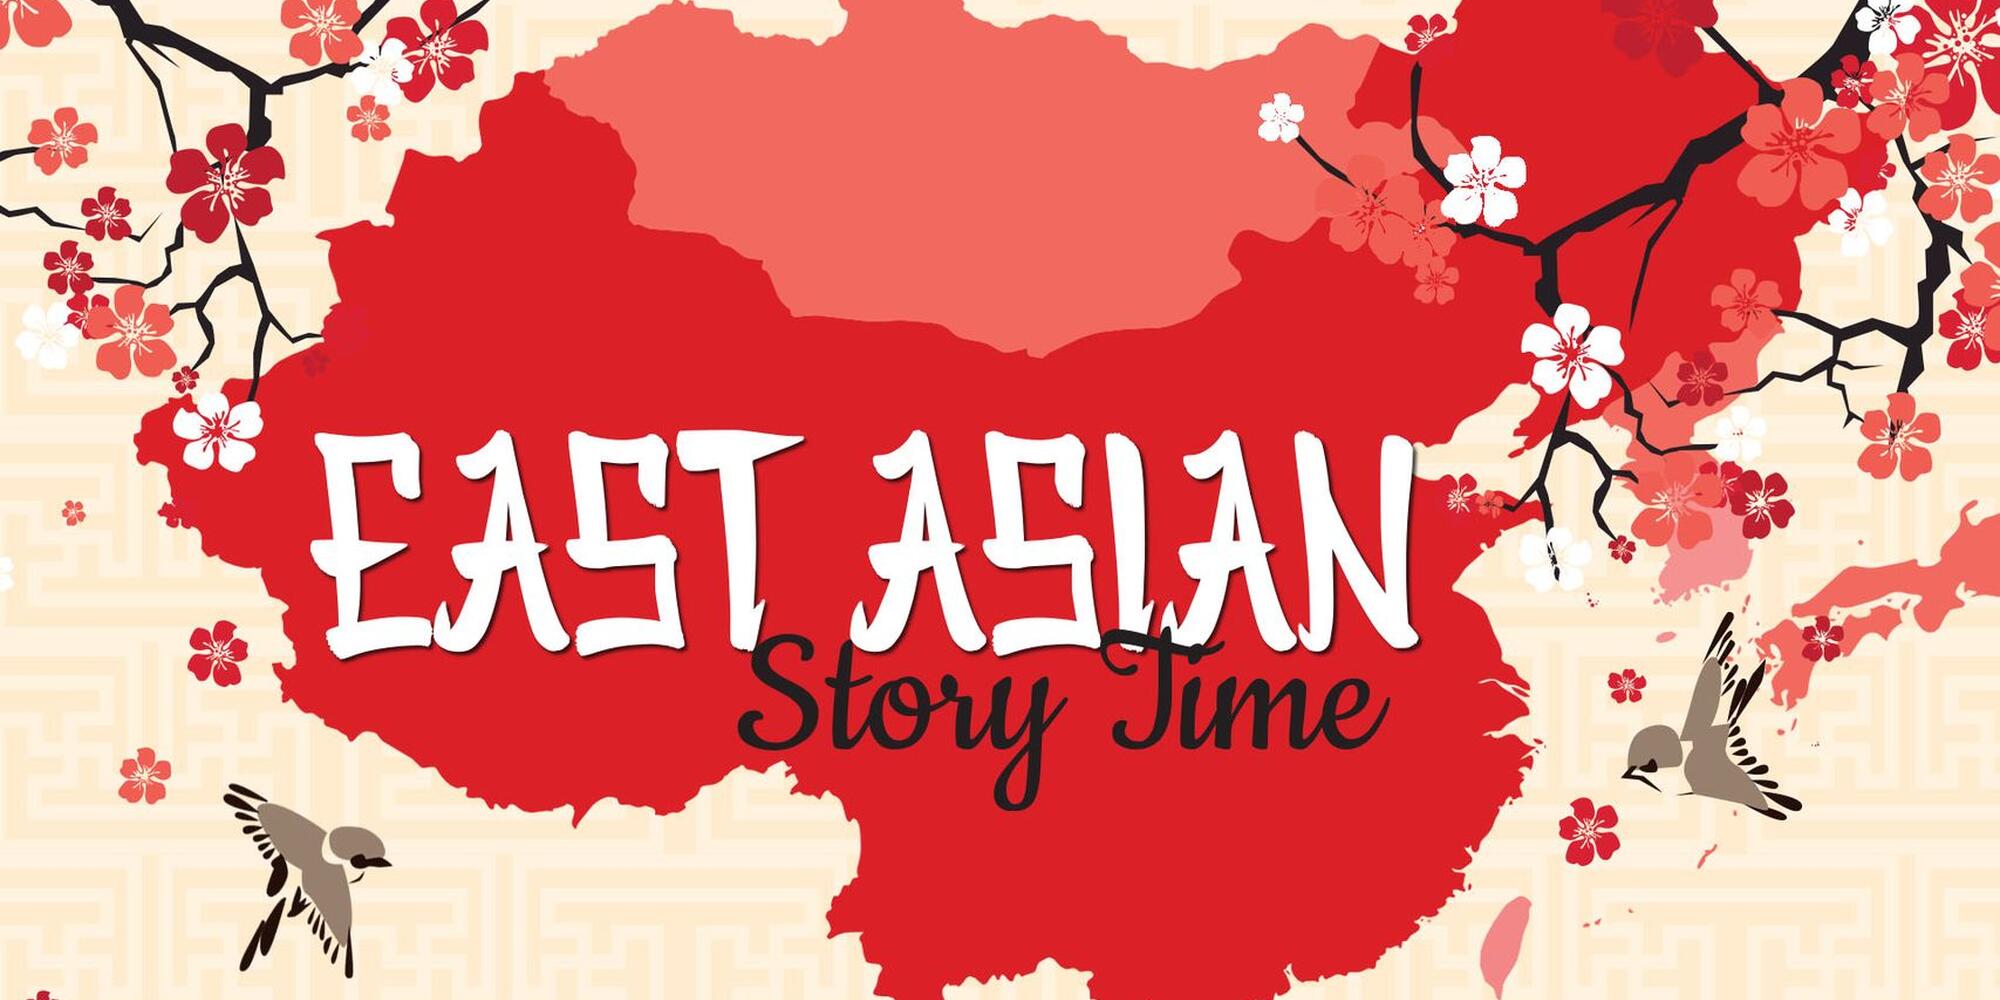 East Asian Story Time